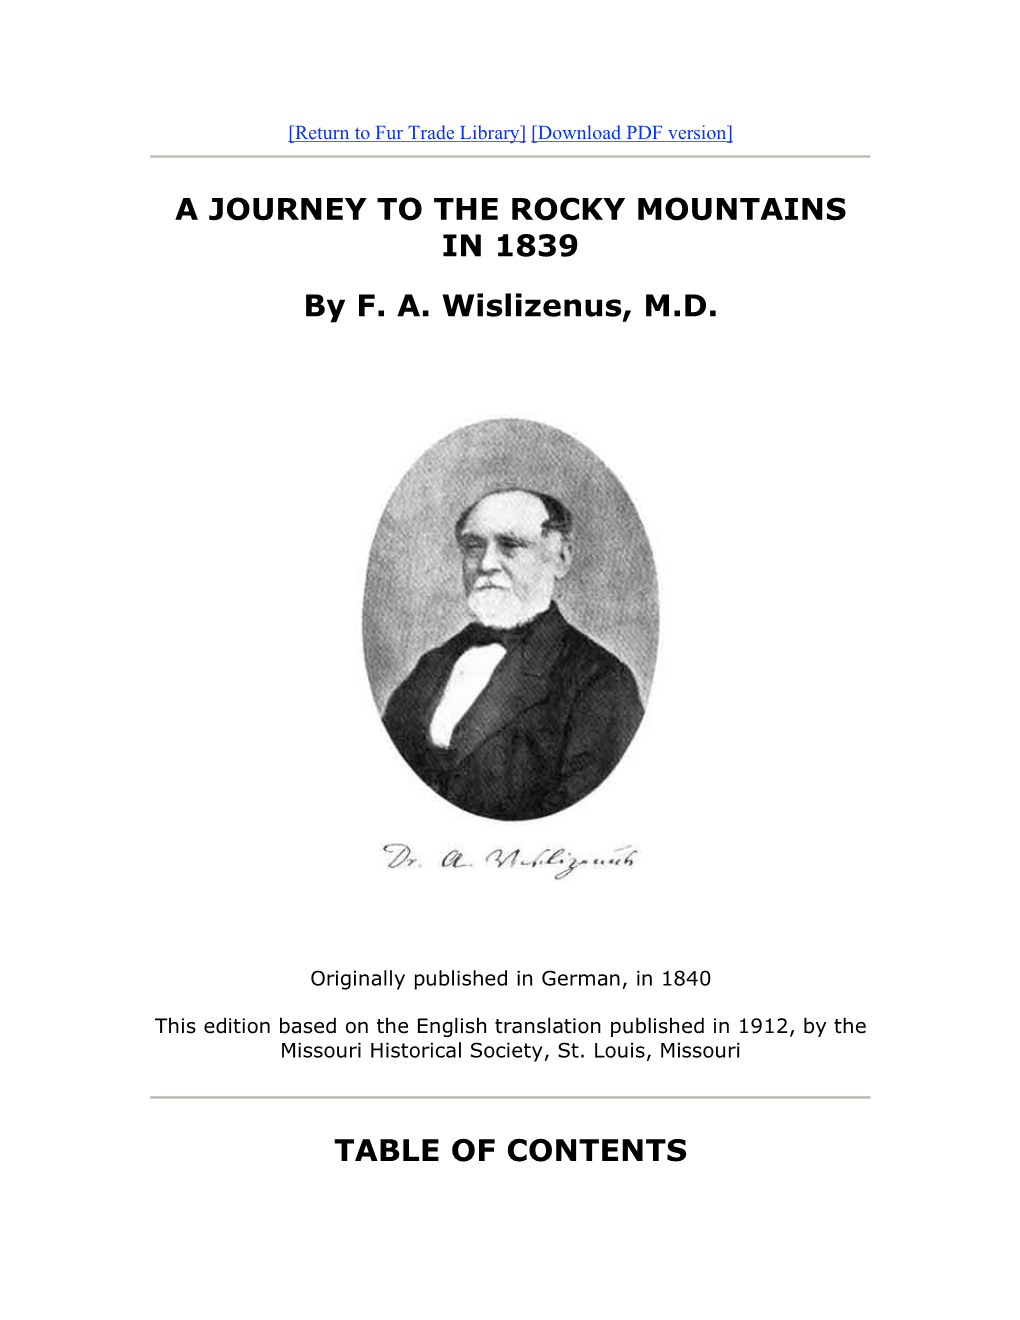 A JOURNEY to the ROCKY MOUNTAINS in 1839 by F. A. Wislizenus, M.D